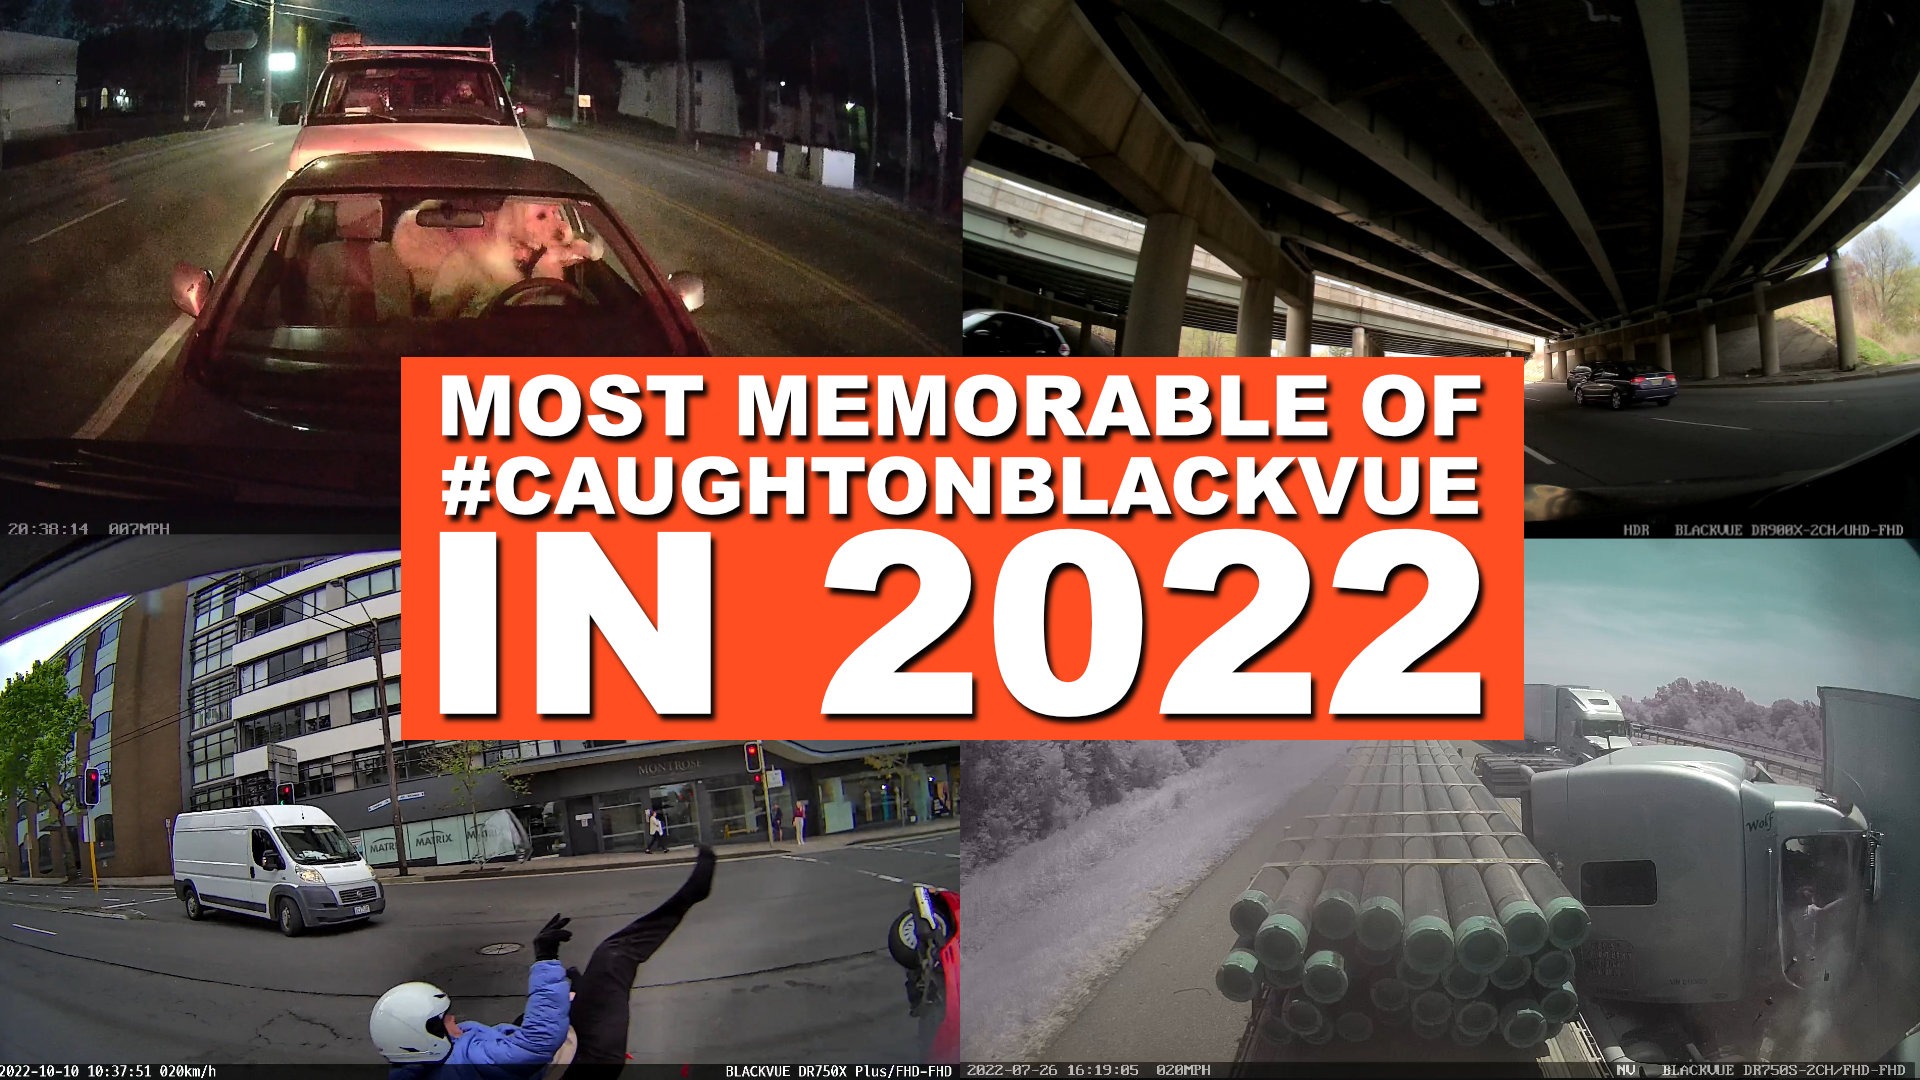 “The Best Of” Caught On BlackVue Videos In 2022